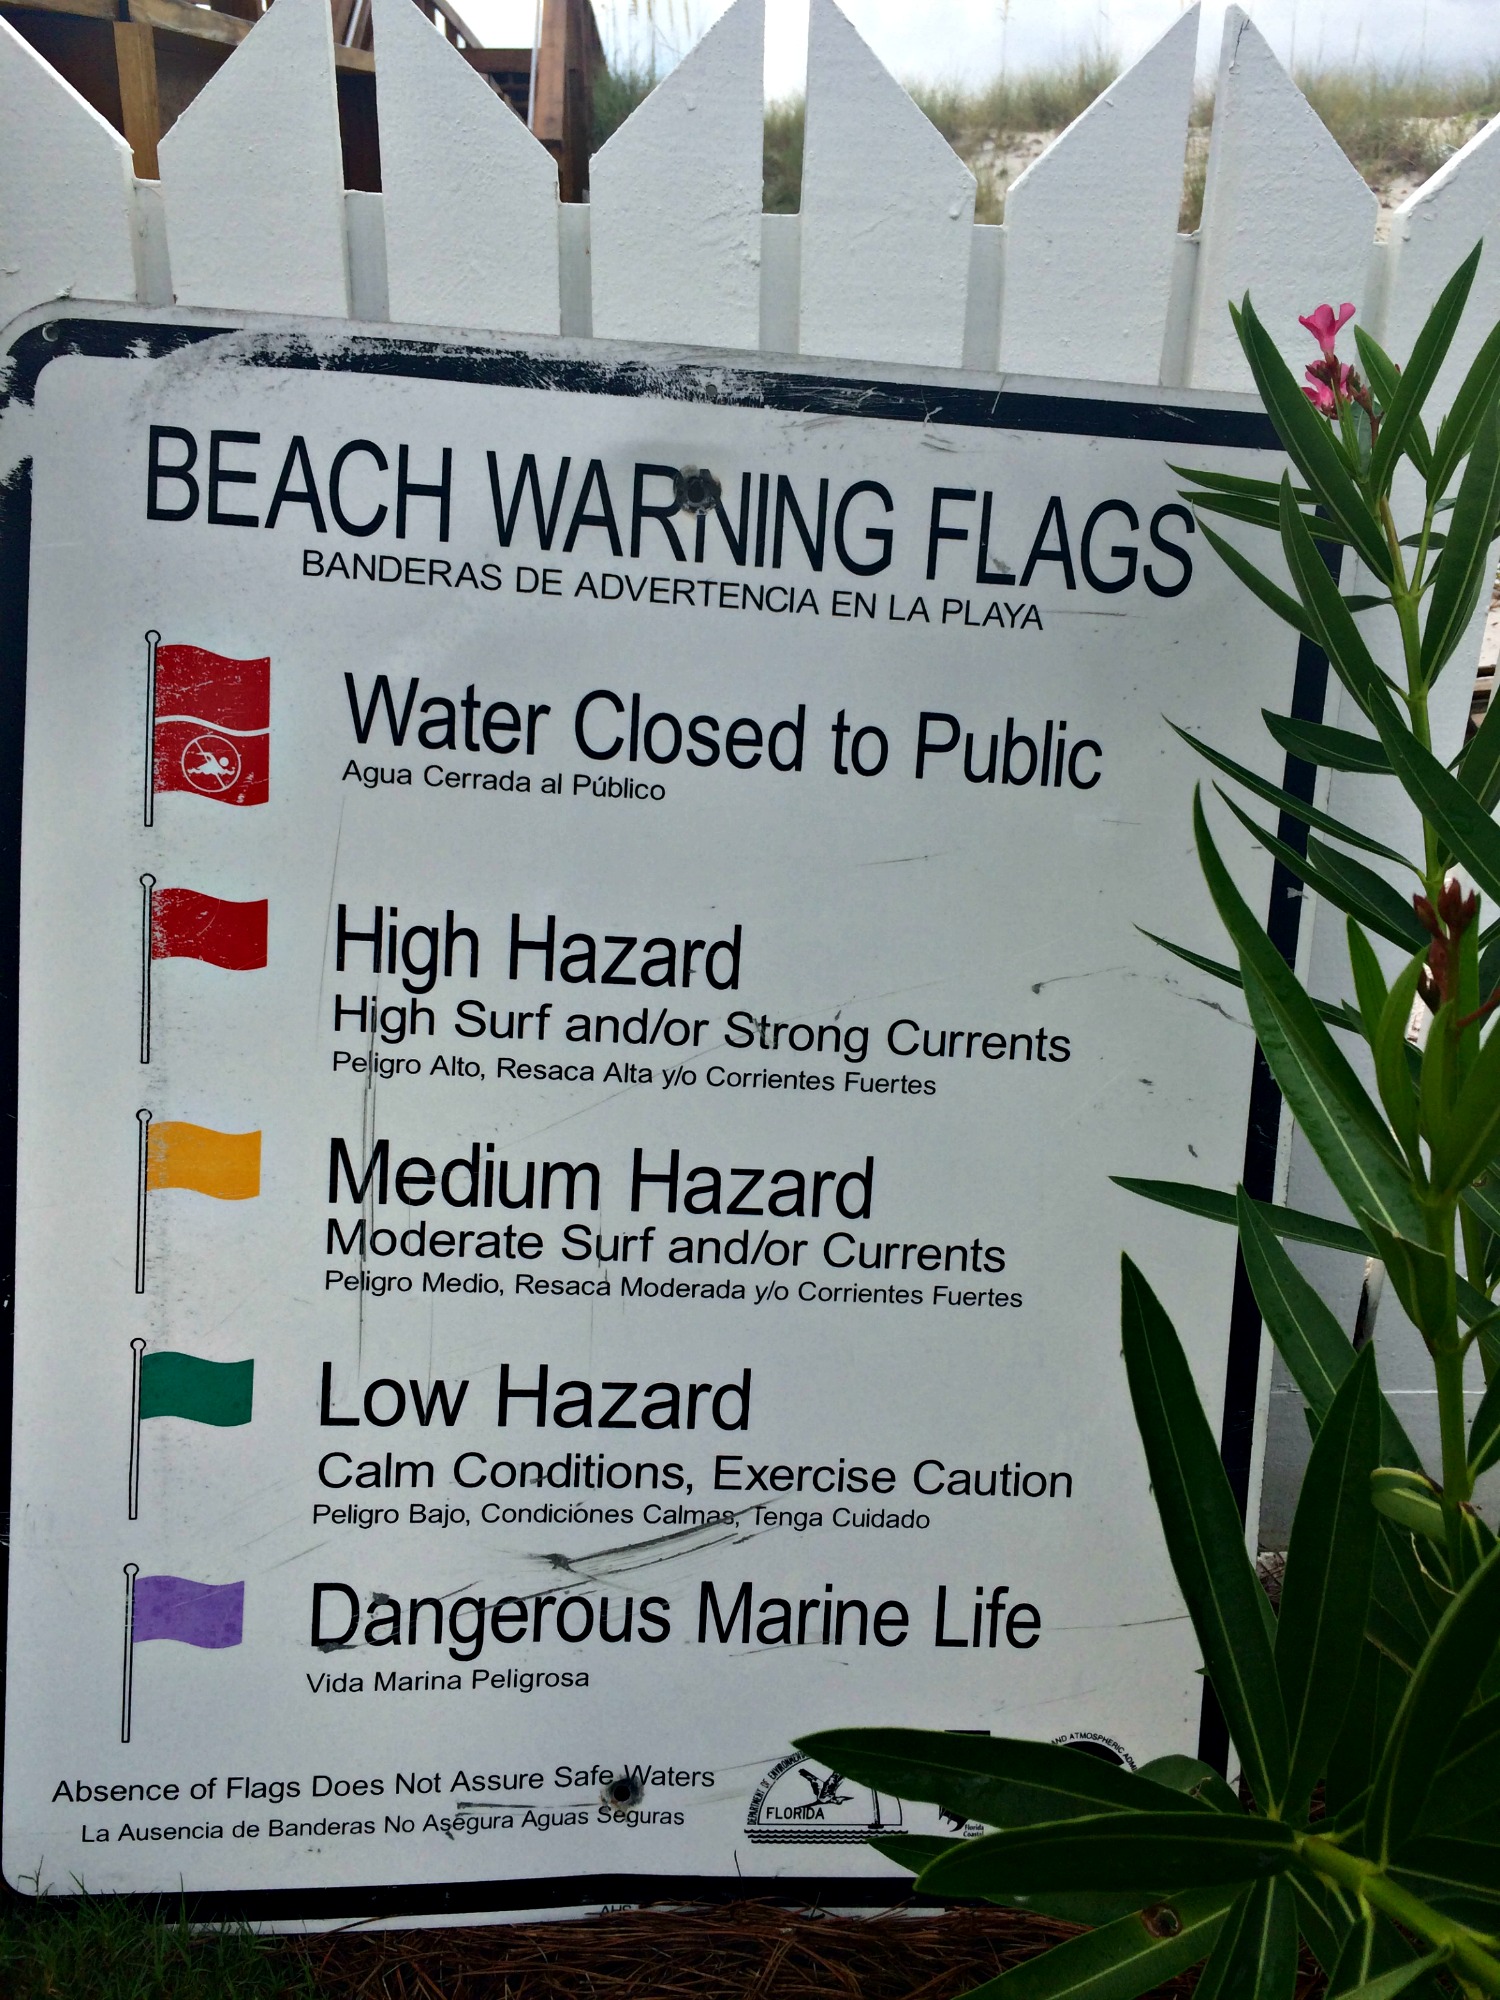 Sign showing meanings of the beach warning flags 